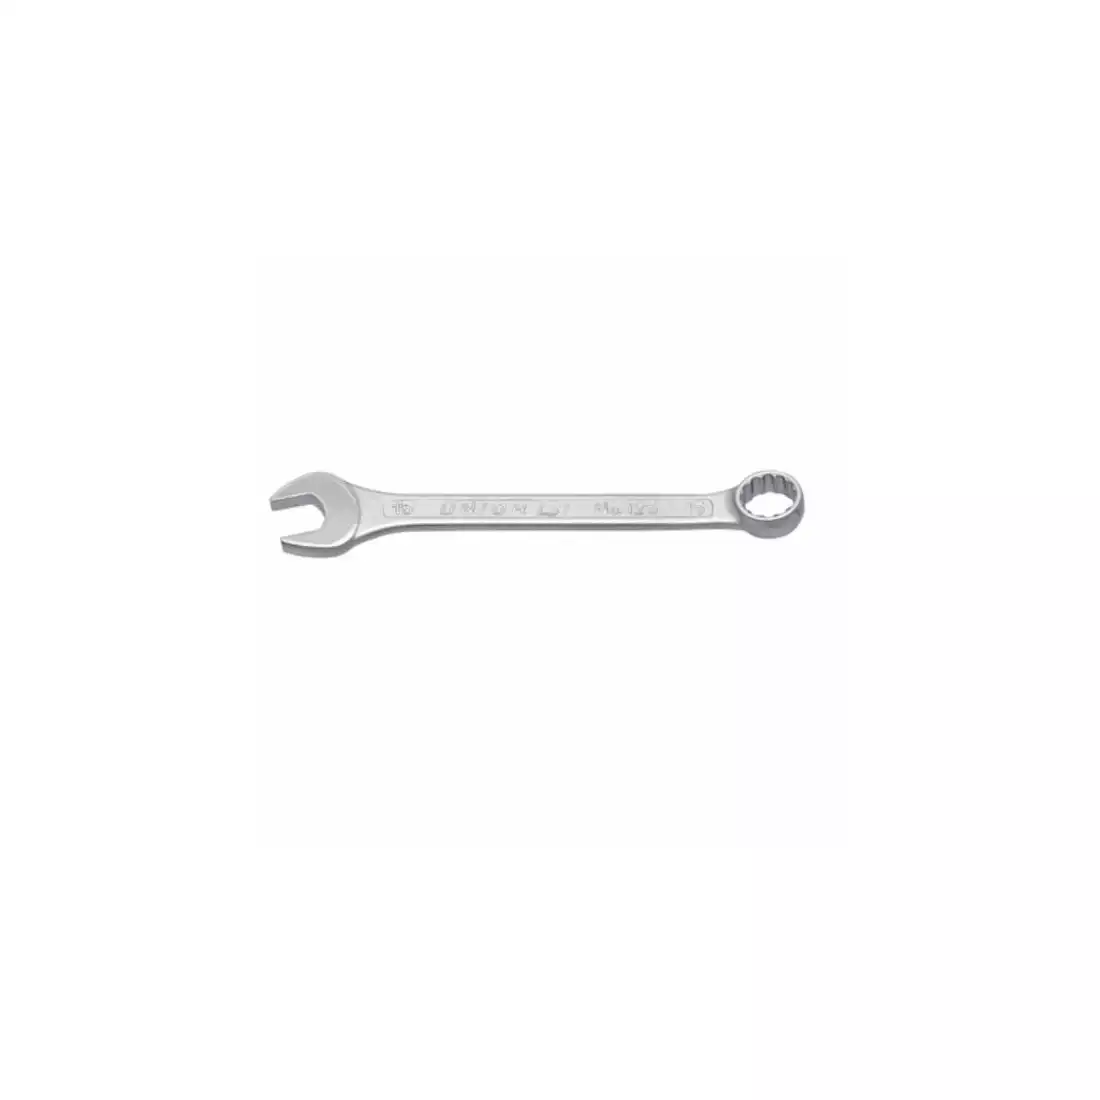 UNIOR combination wrench, short type 10 mm